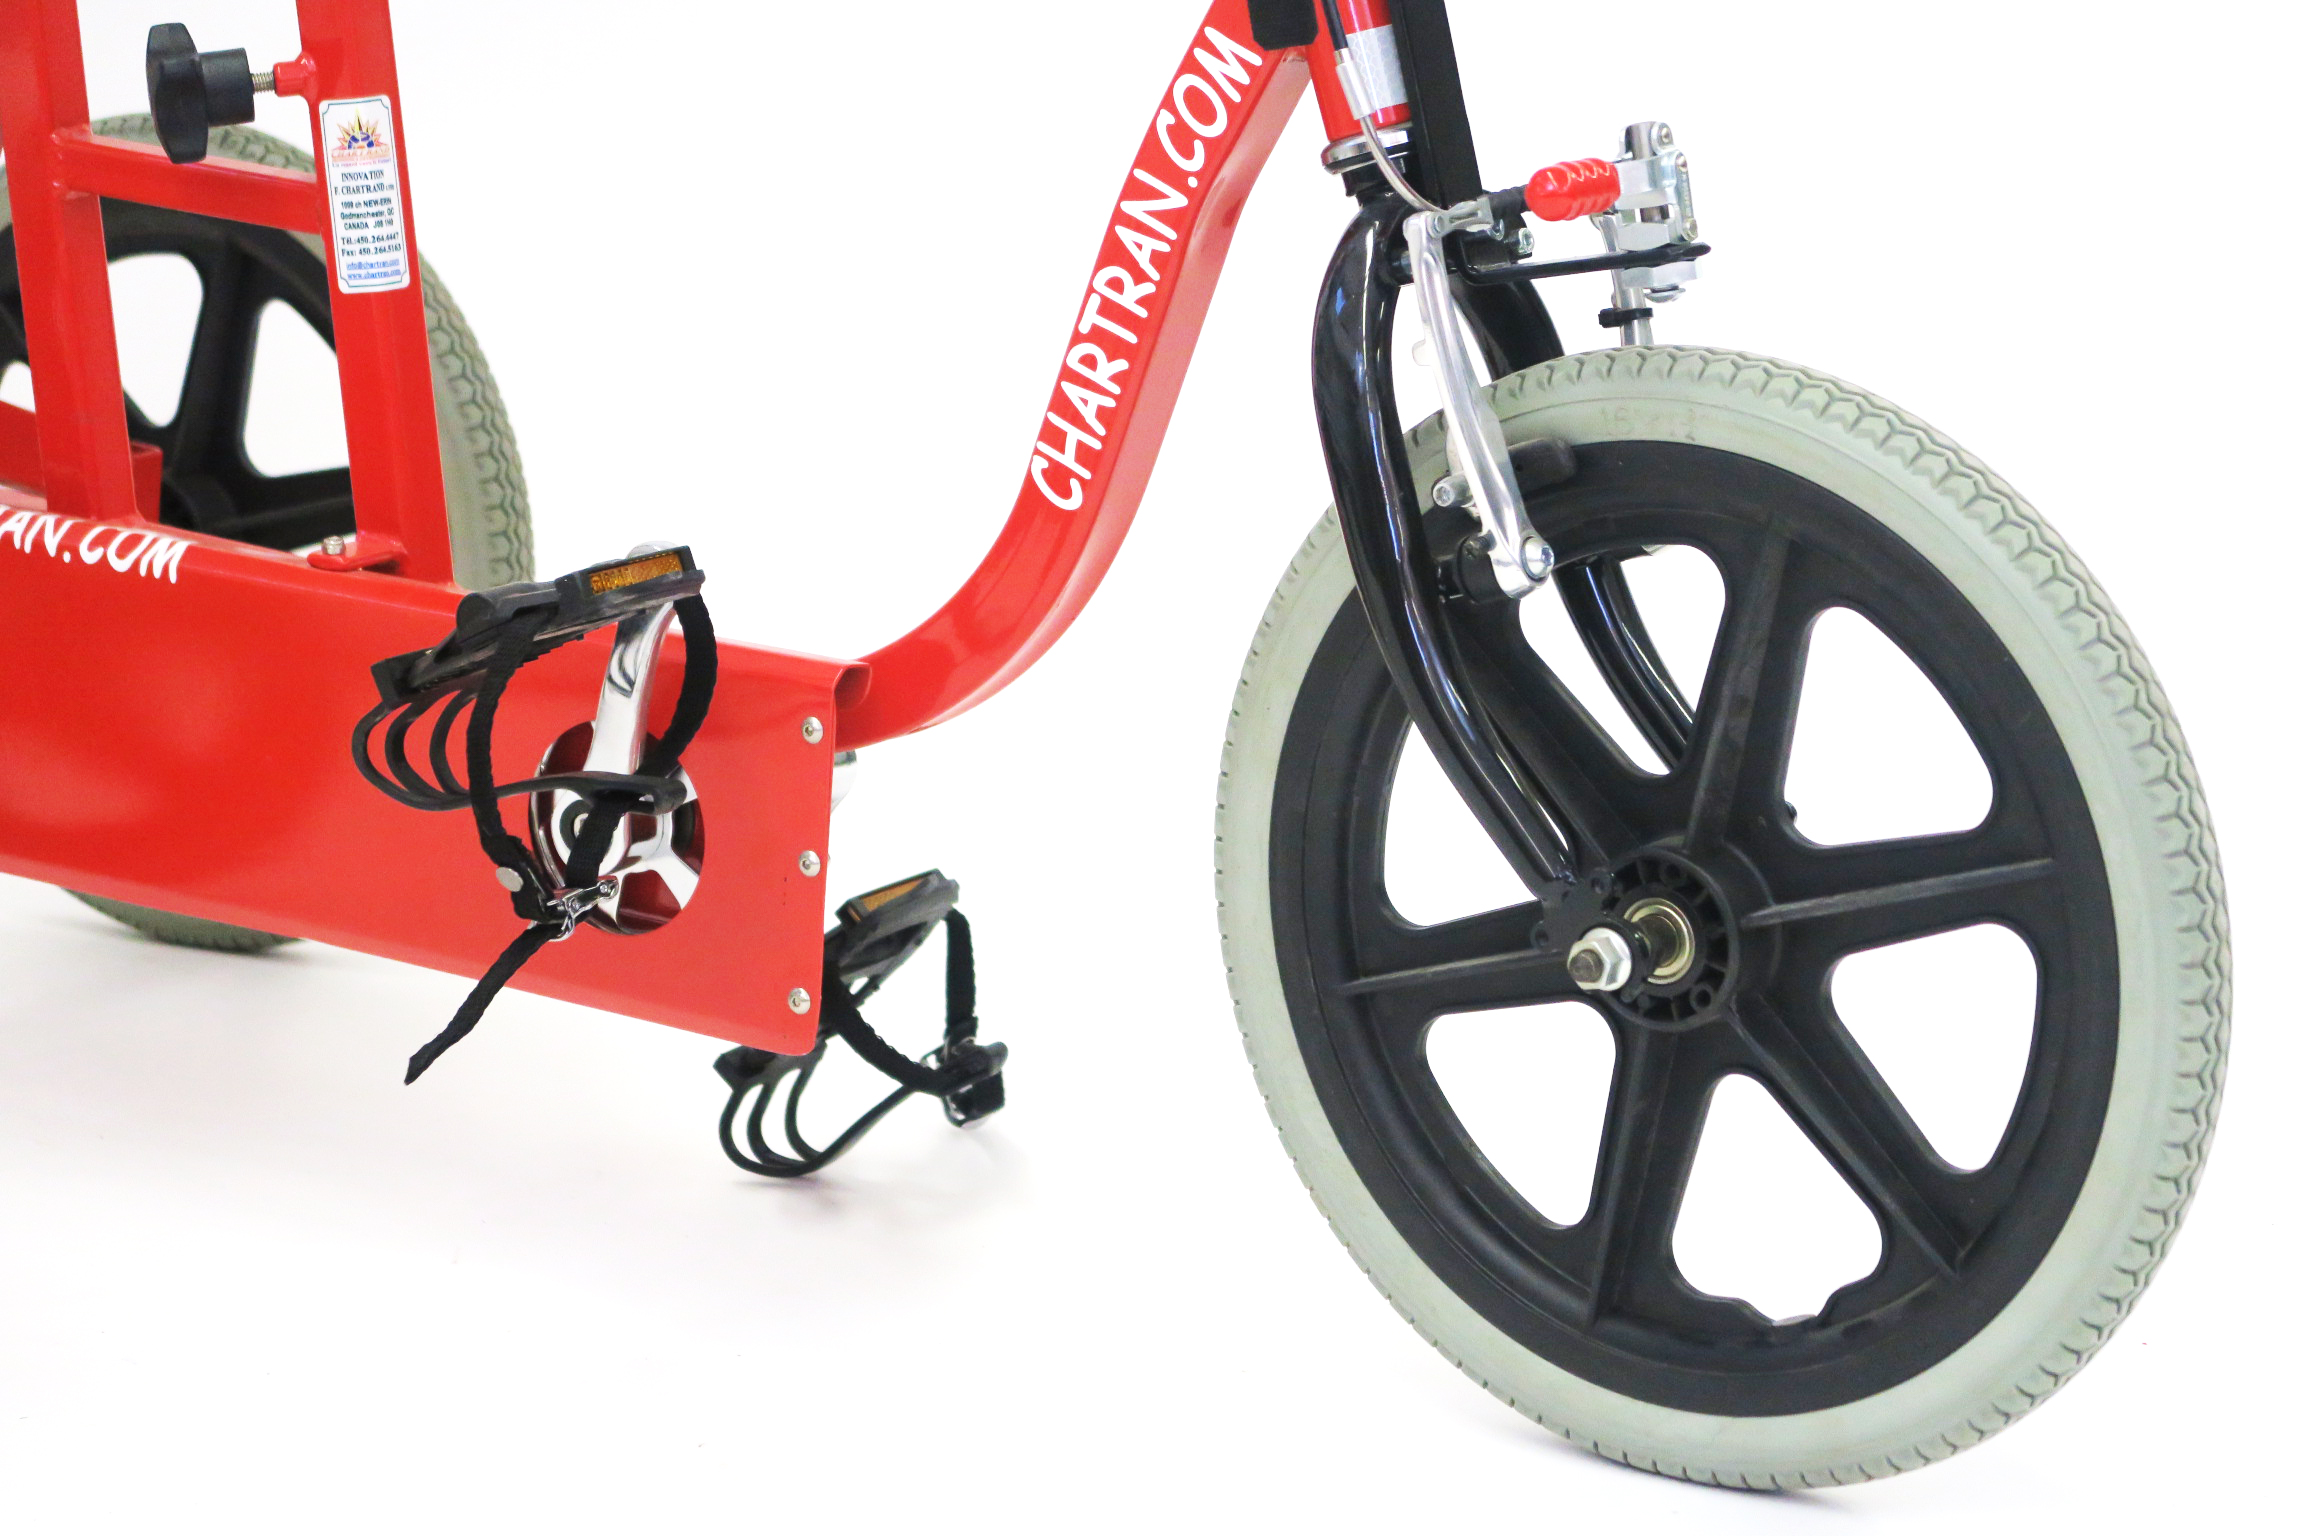 Tricycle enfant Tremblay CT Viking - Route